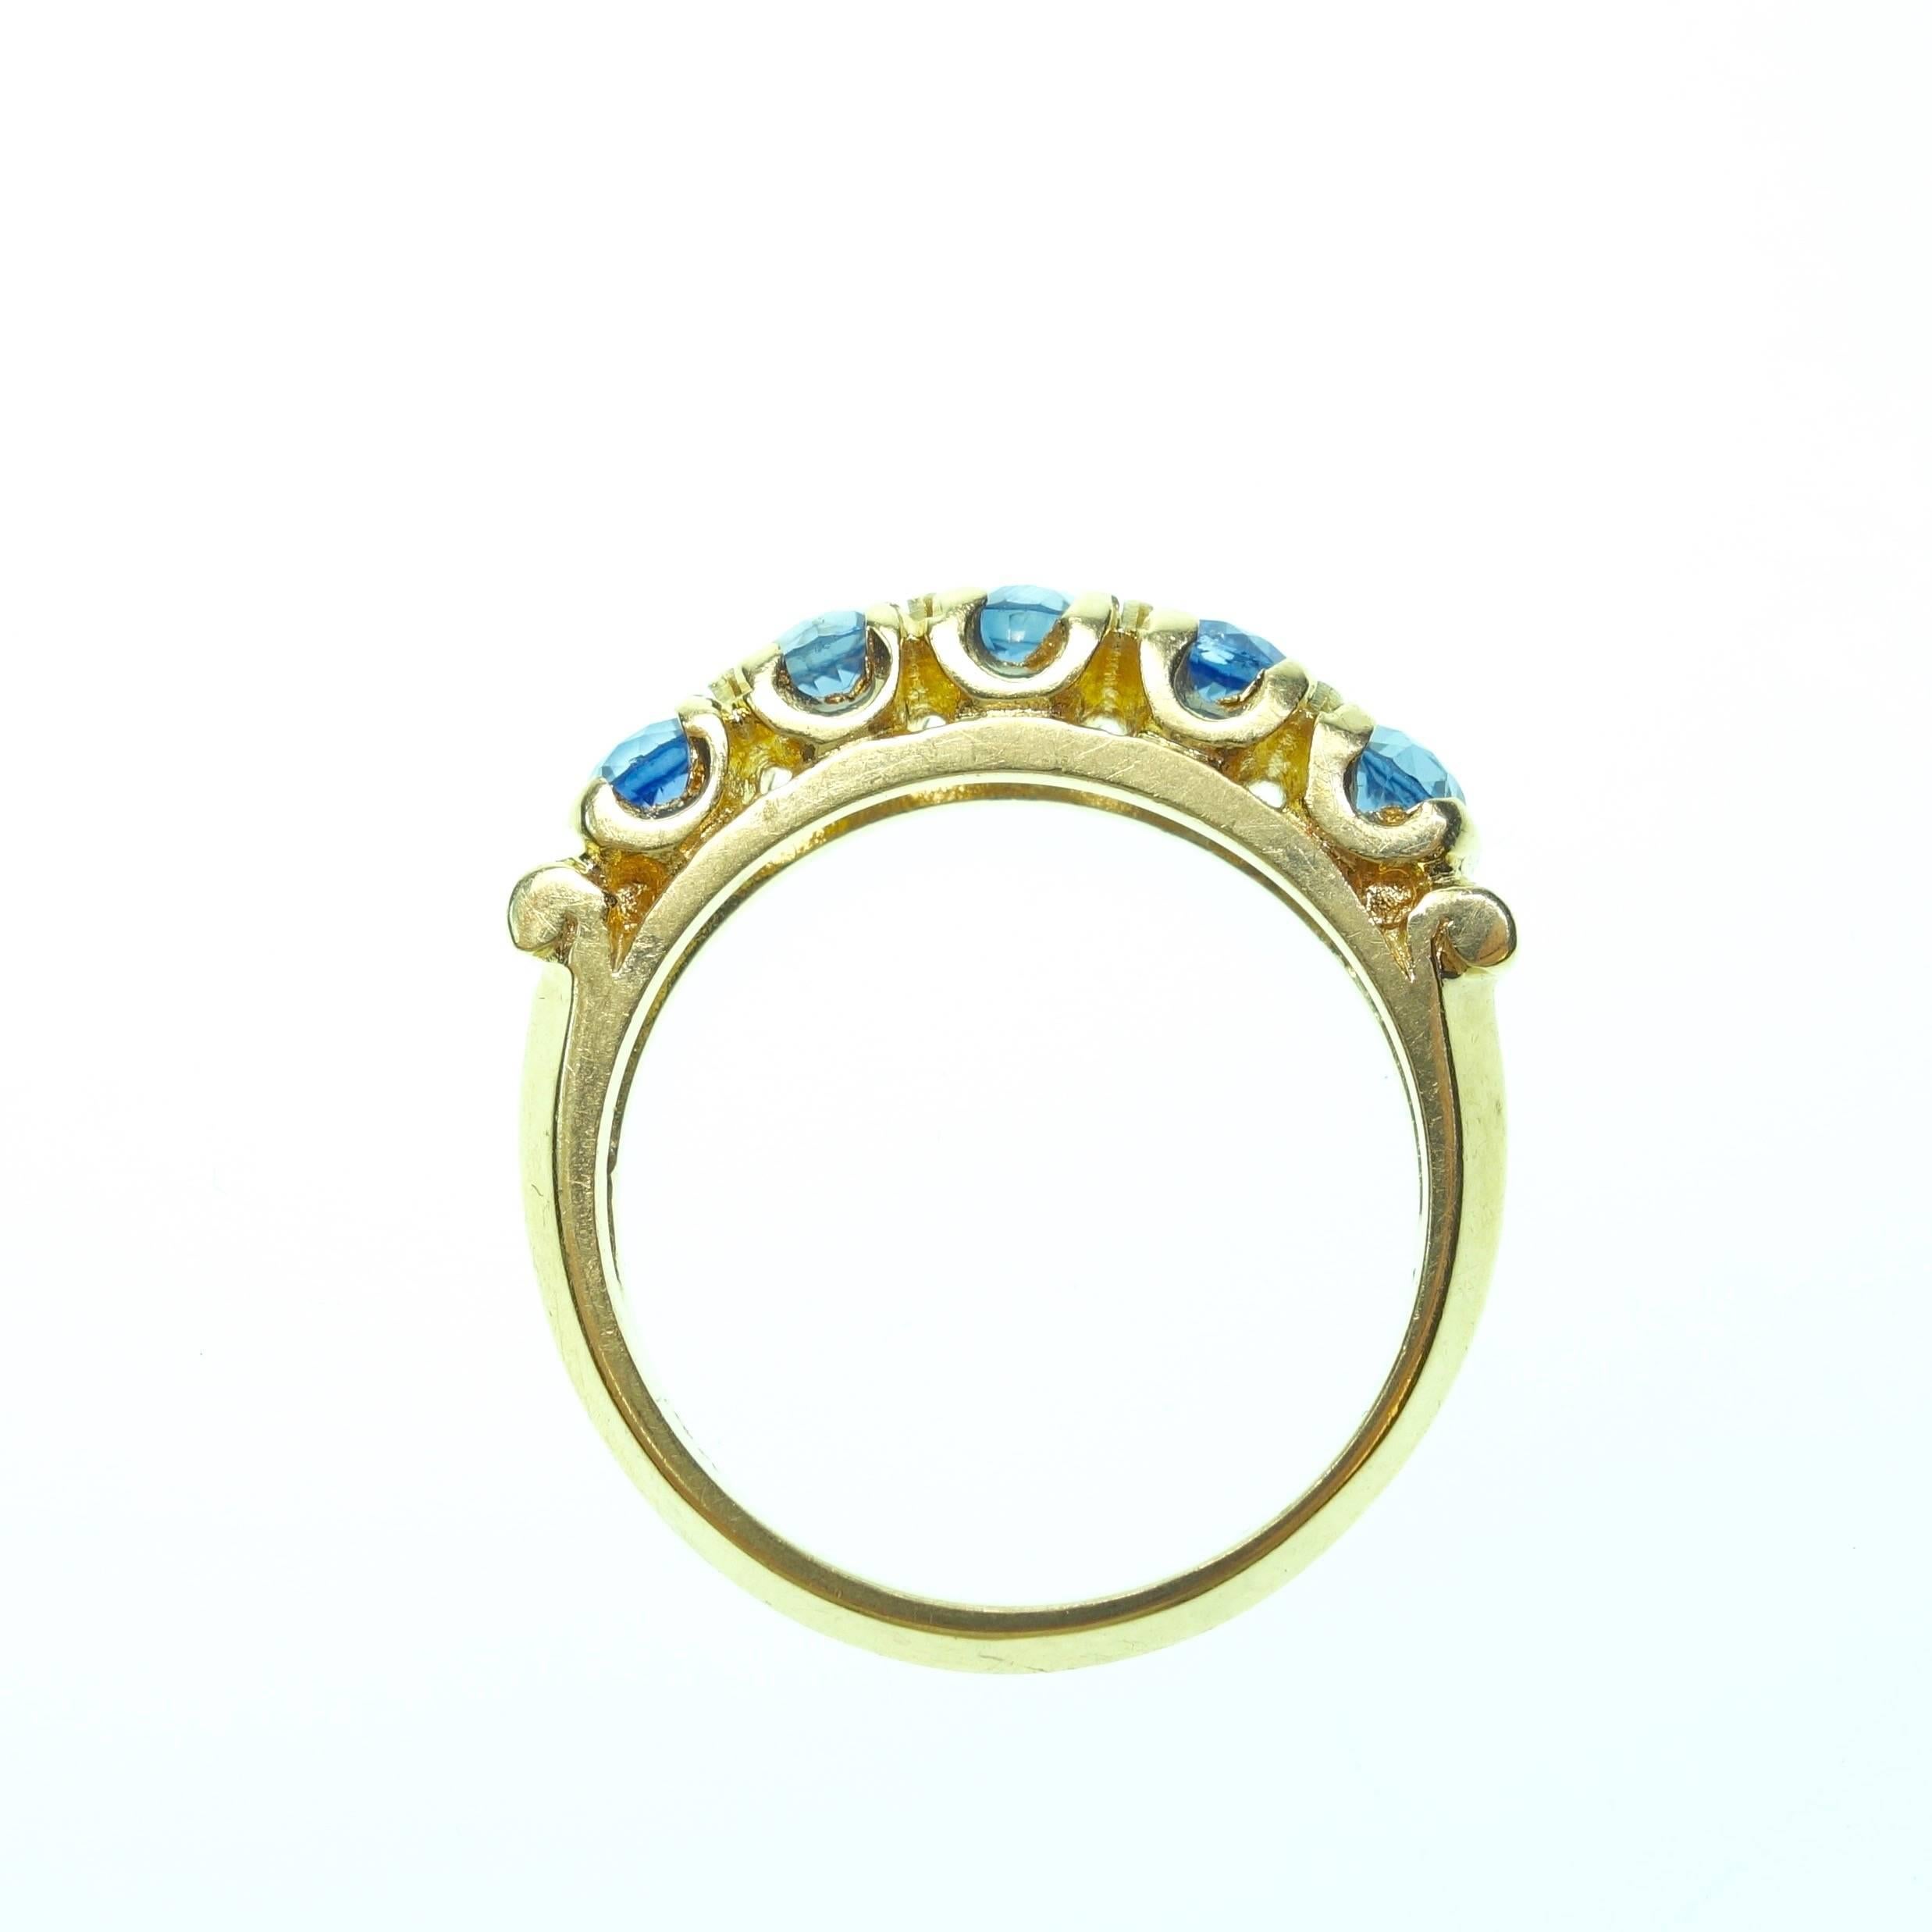 Gorgeous Victorian 14K yellow gold ring featuring five round cut highly saturated, brilliant blue sapphire solitaires. Approximate total weight: 1.75ct. Pictures don't give justice. Size: 6 (sizable)
Weight: 3.5 grams